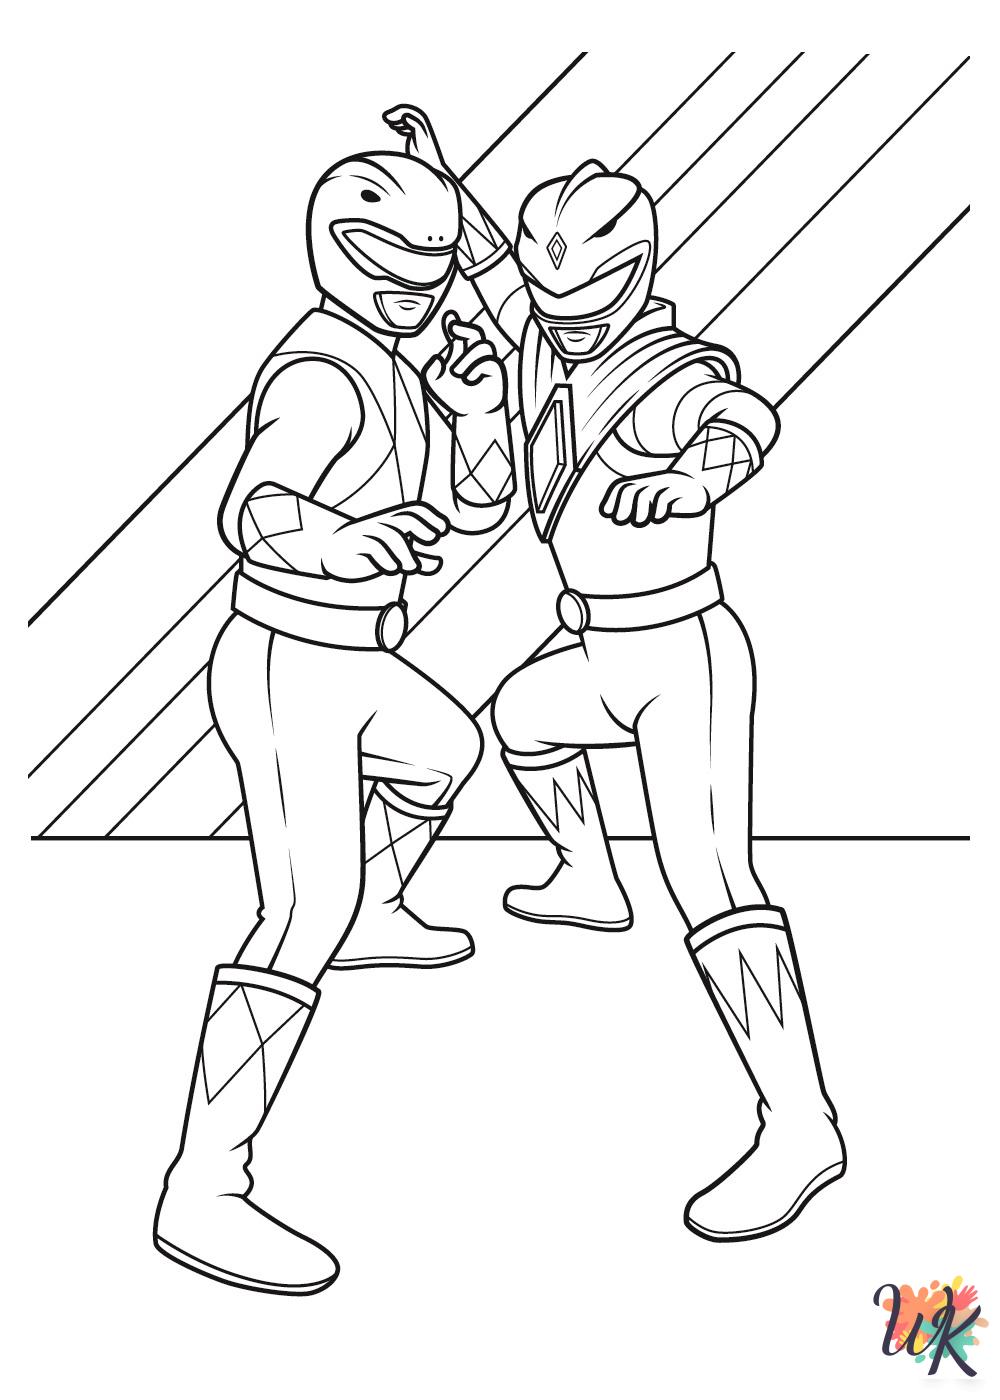 Power Rangers coloring pages free printable